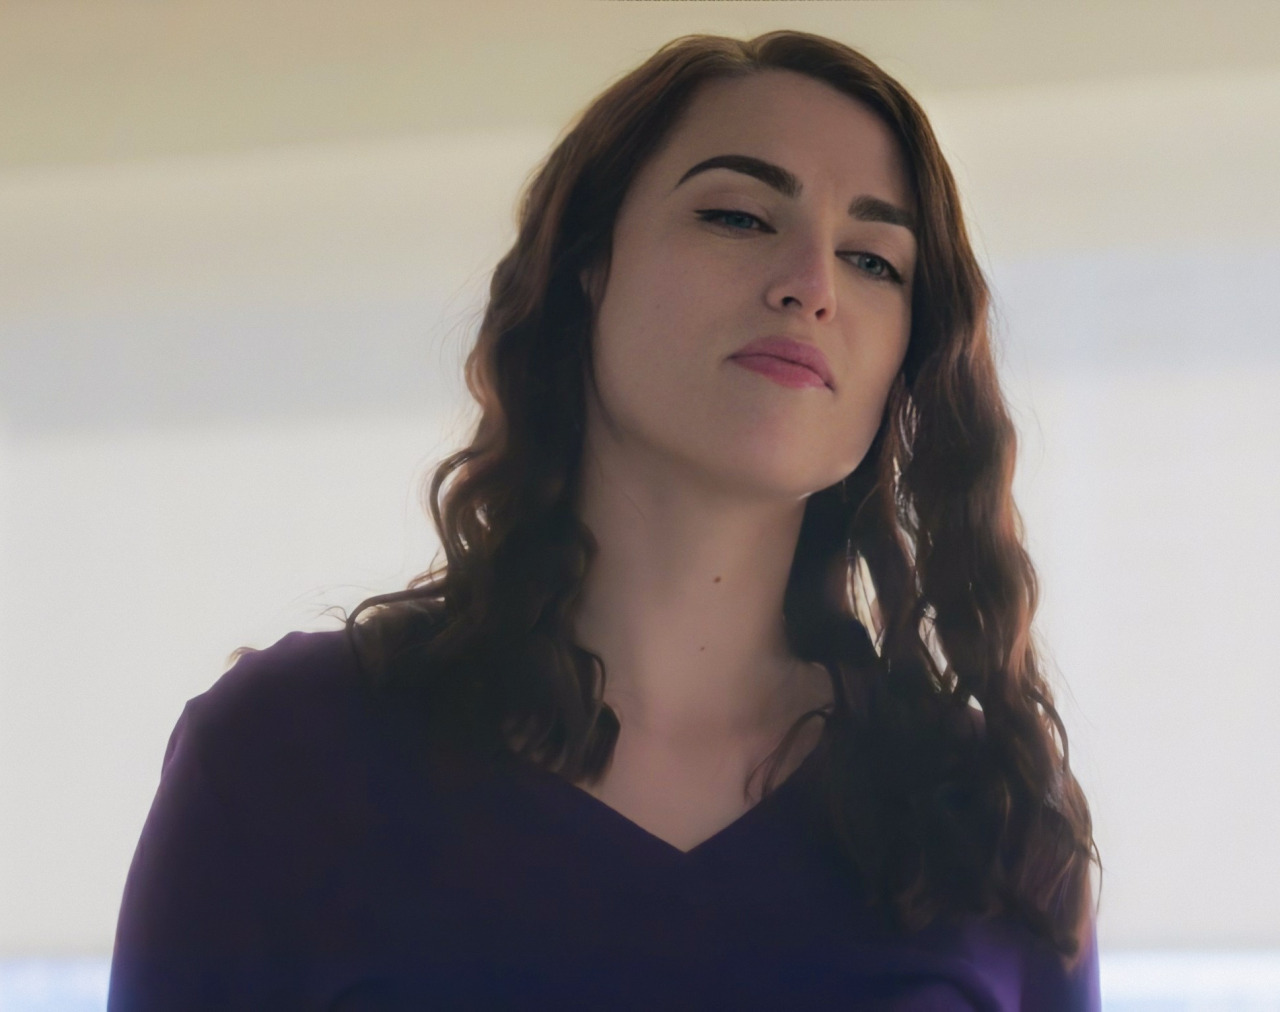 Kara Cannot Have Her Boob Glances While Lena Is